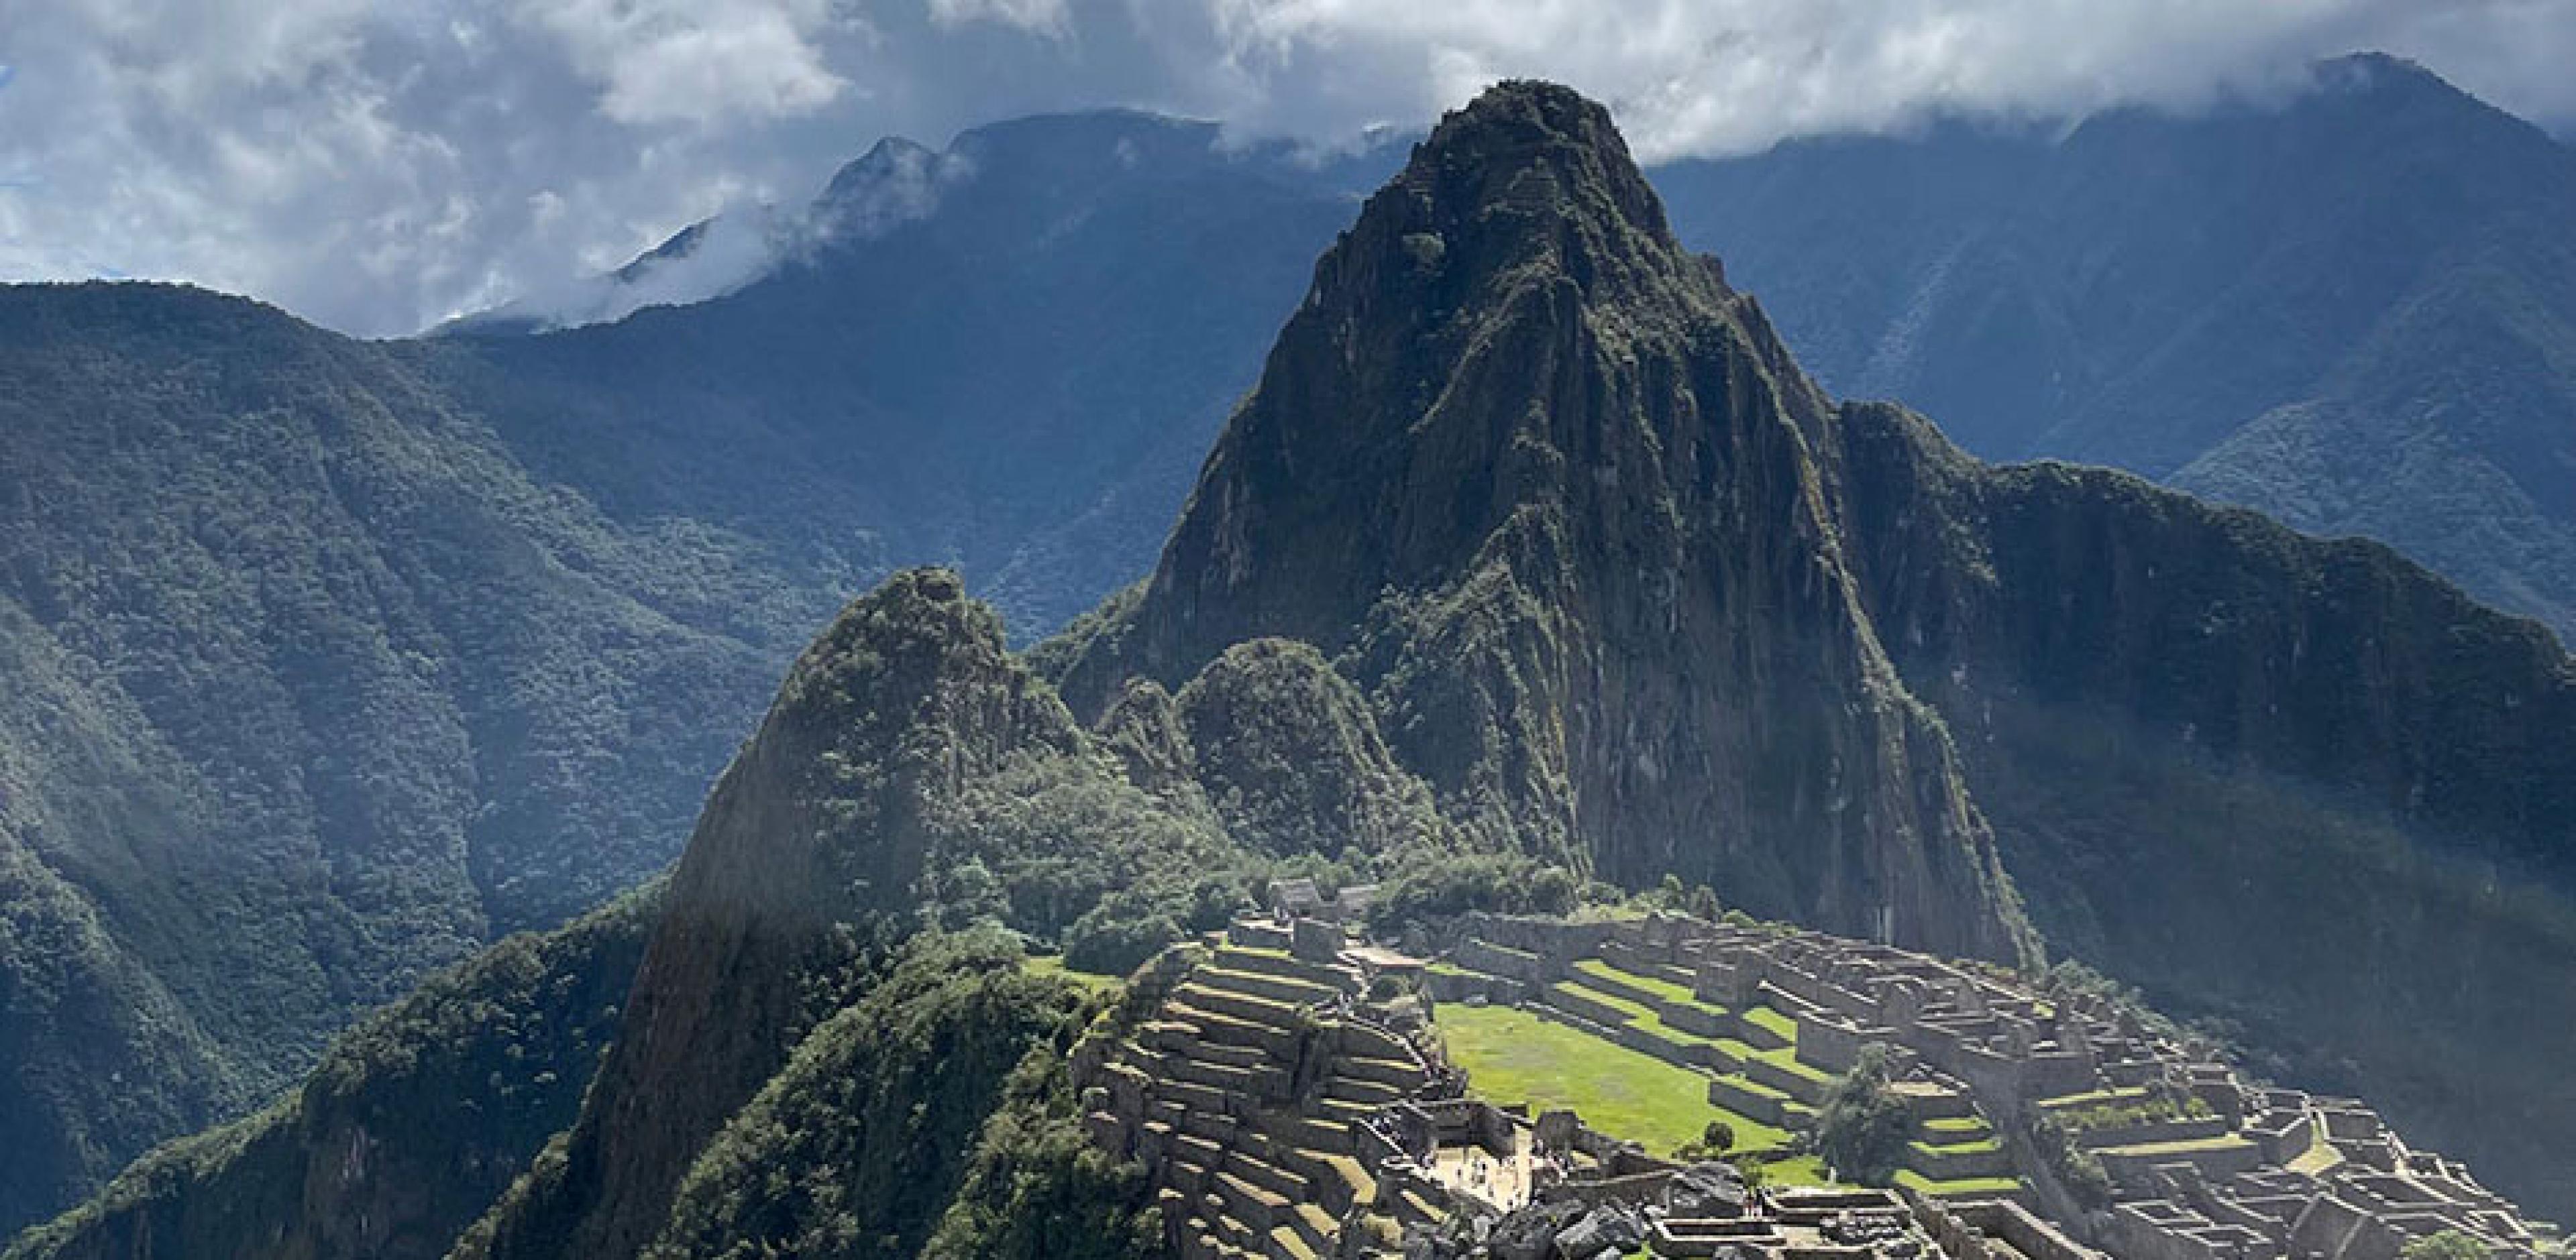 Reaching New Heights: A Family Trip of A Lifetime in Peru